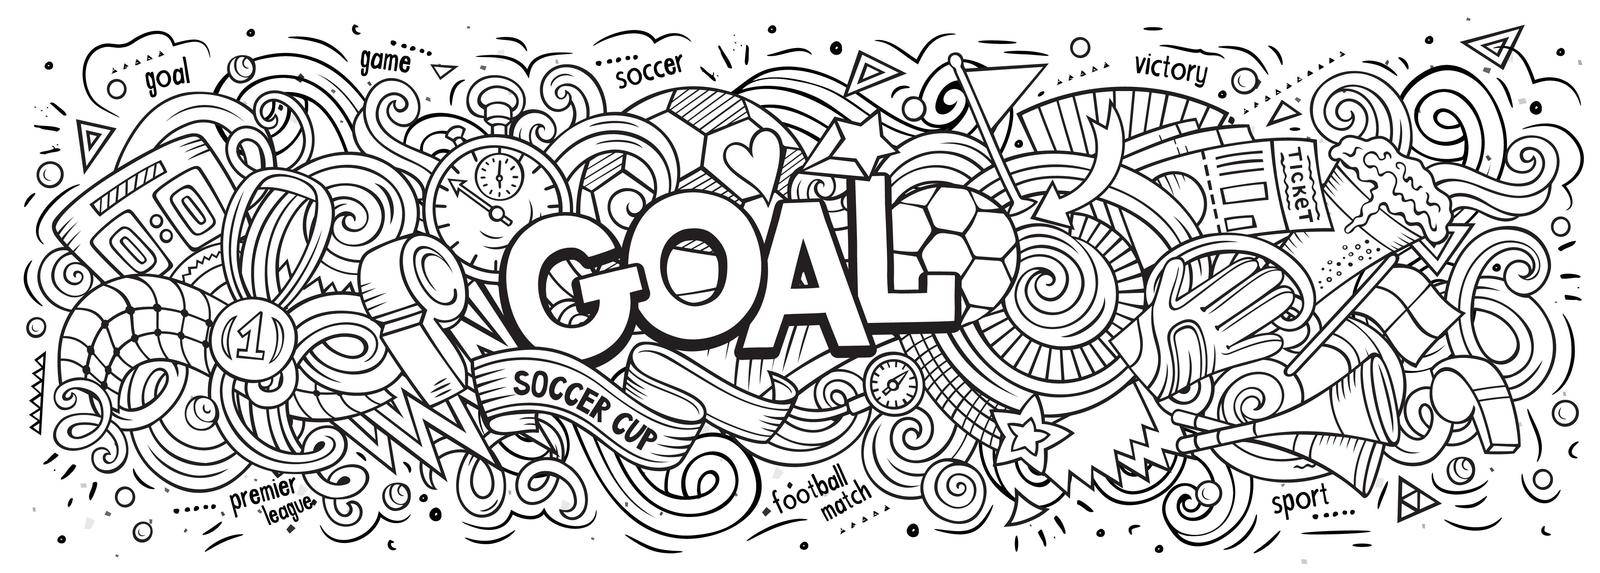 Cartoon cute doodles Goal word. Colorful horizontal illustration. Background with lots of separate objects. Funny vector artwork